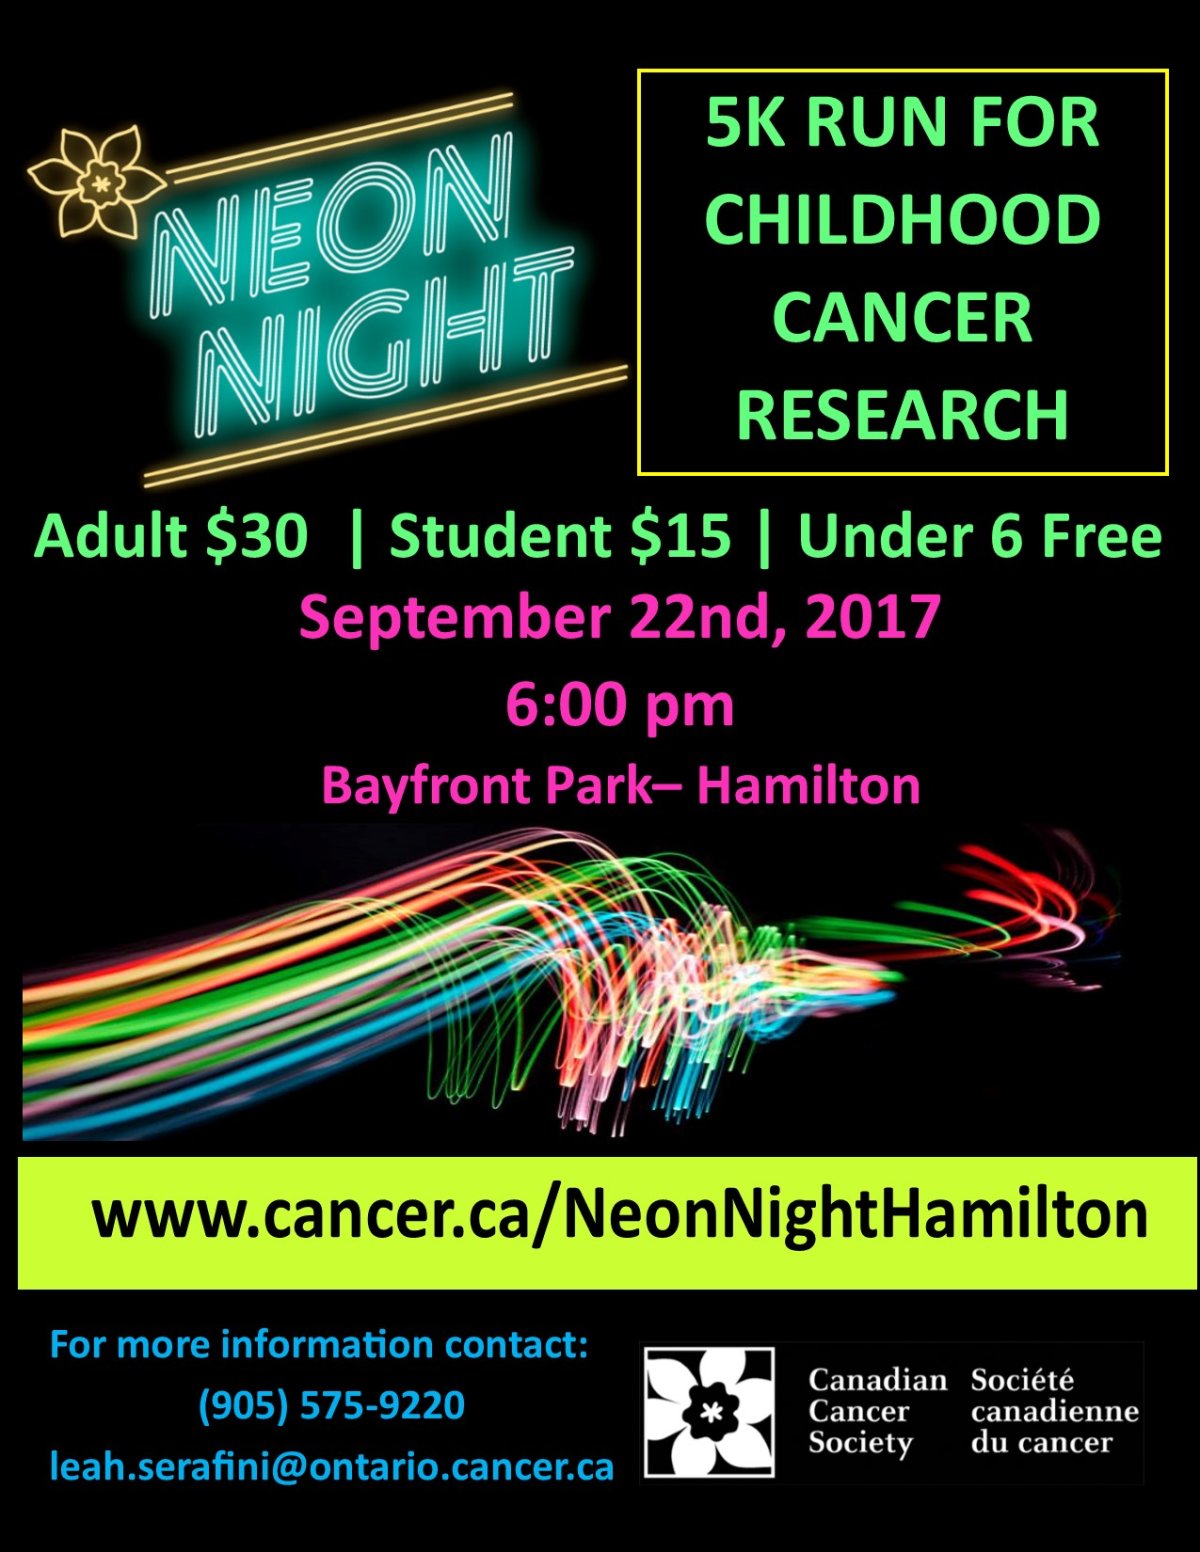 Neon Night 5K Run For Childhood Cancer Research - image